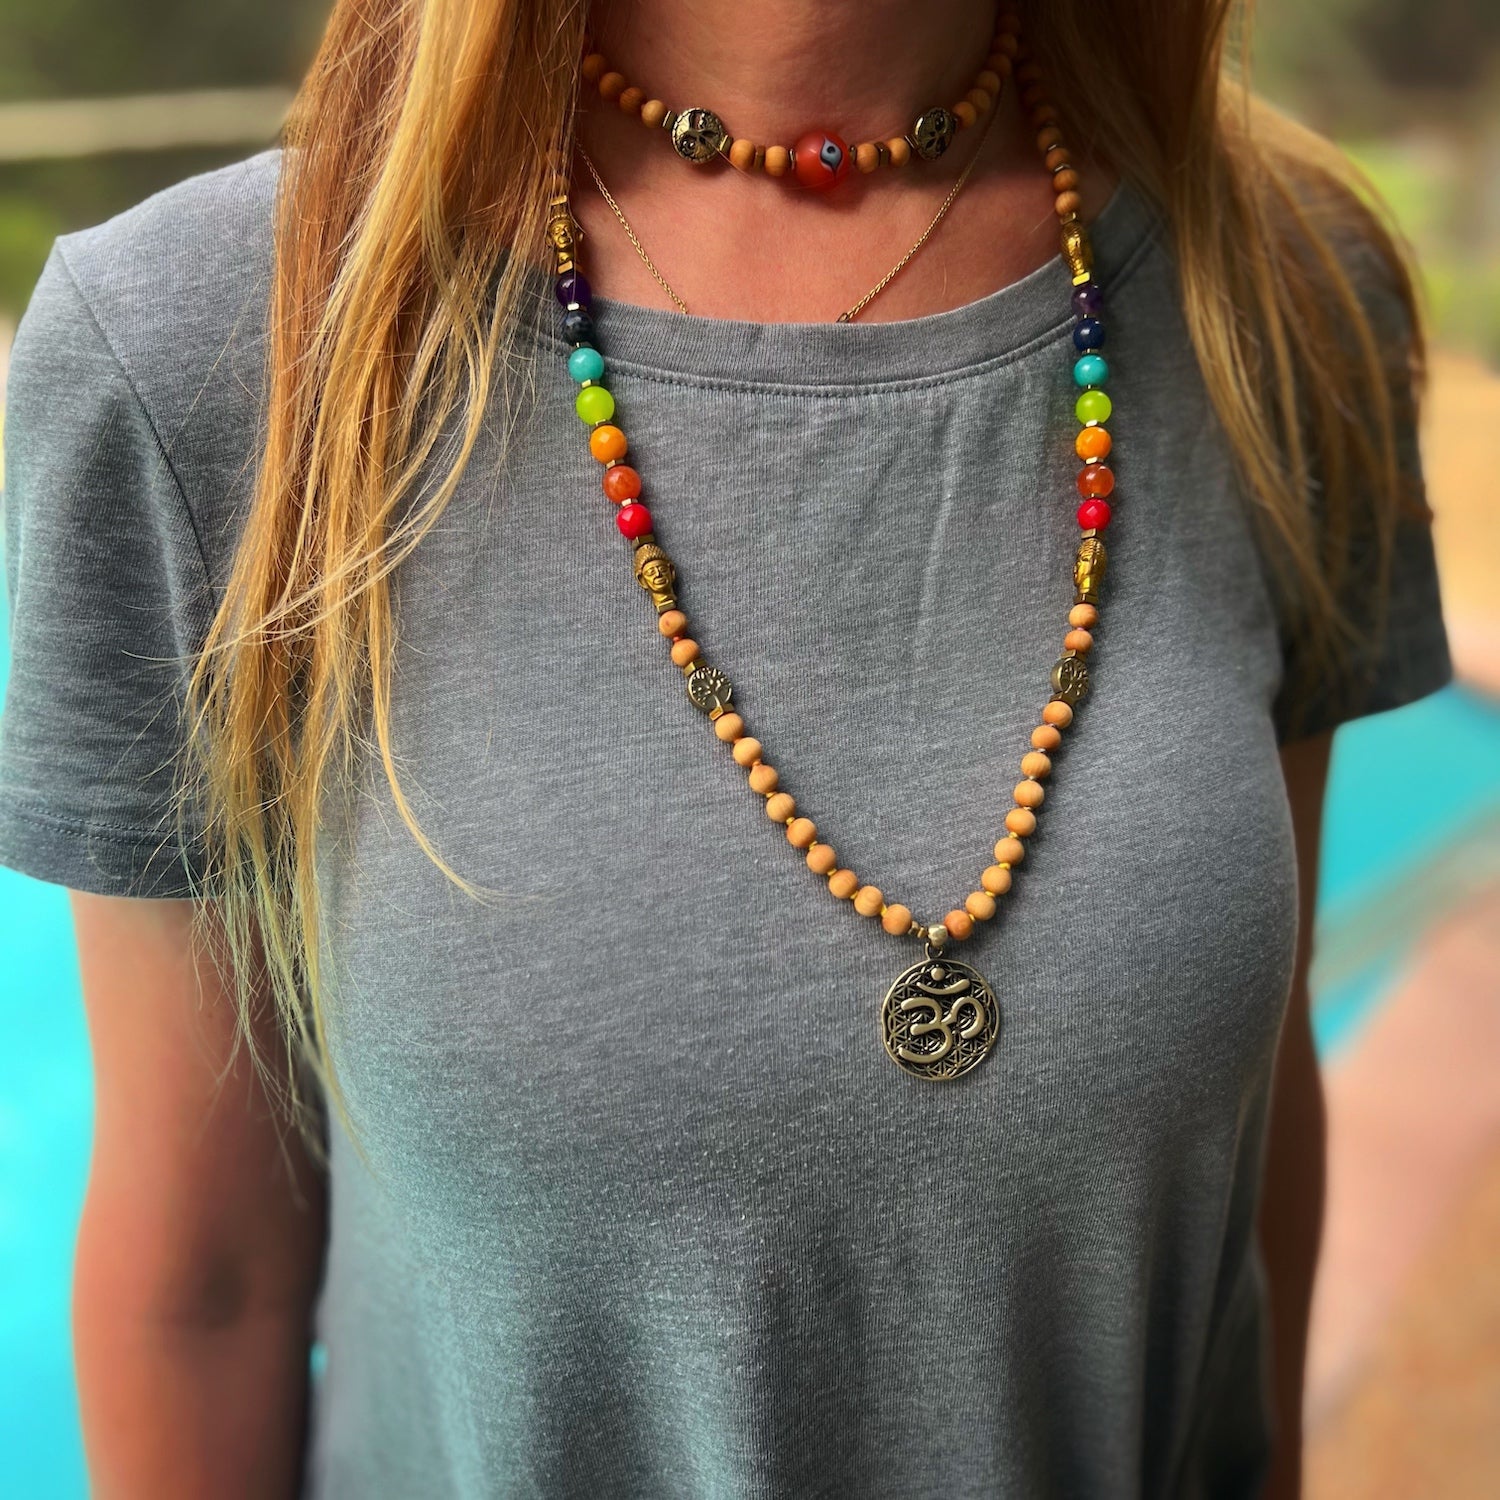 Model showcasing the power of the Chakra Yoga Mala Necklace, handcrafted with care for your spiritual journey.